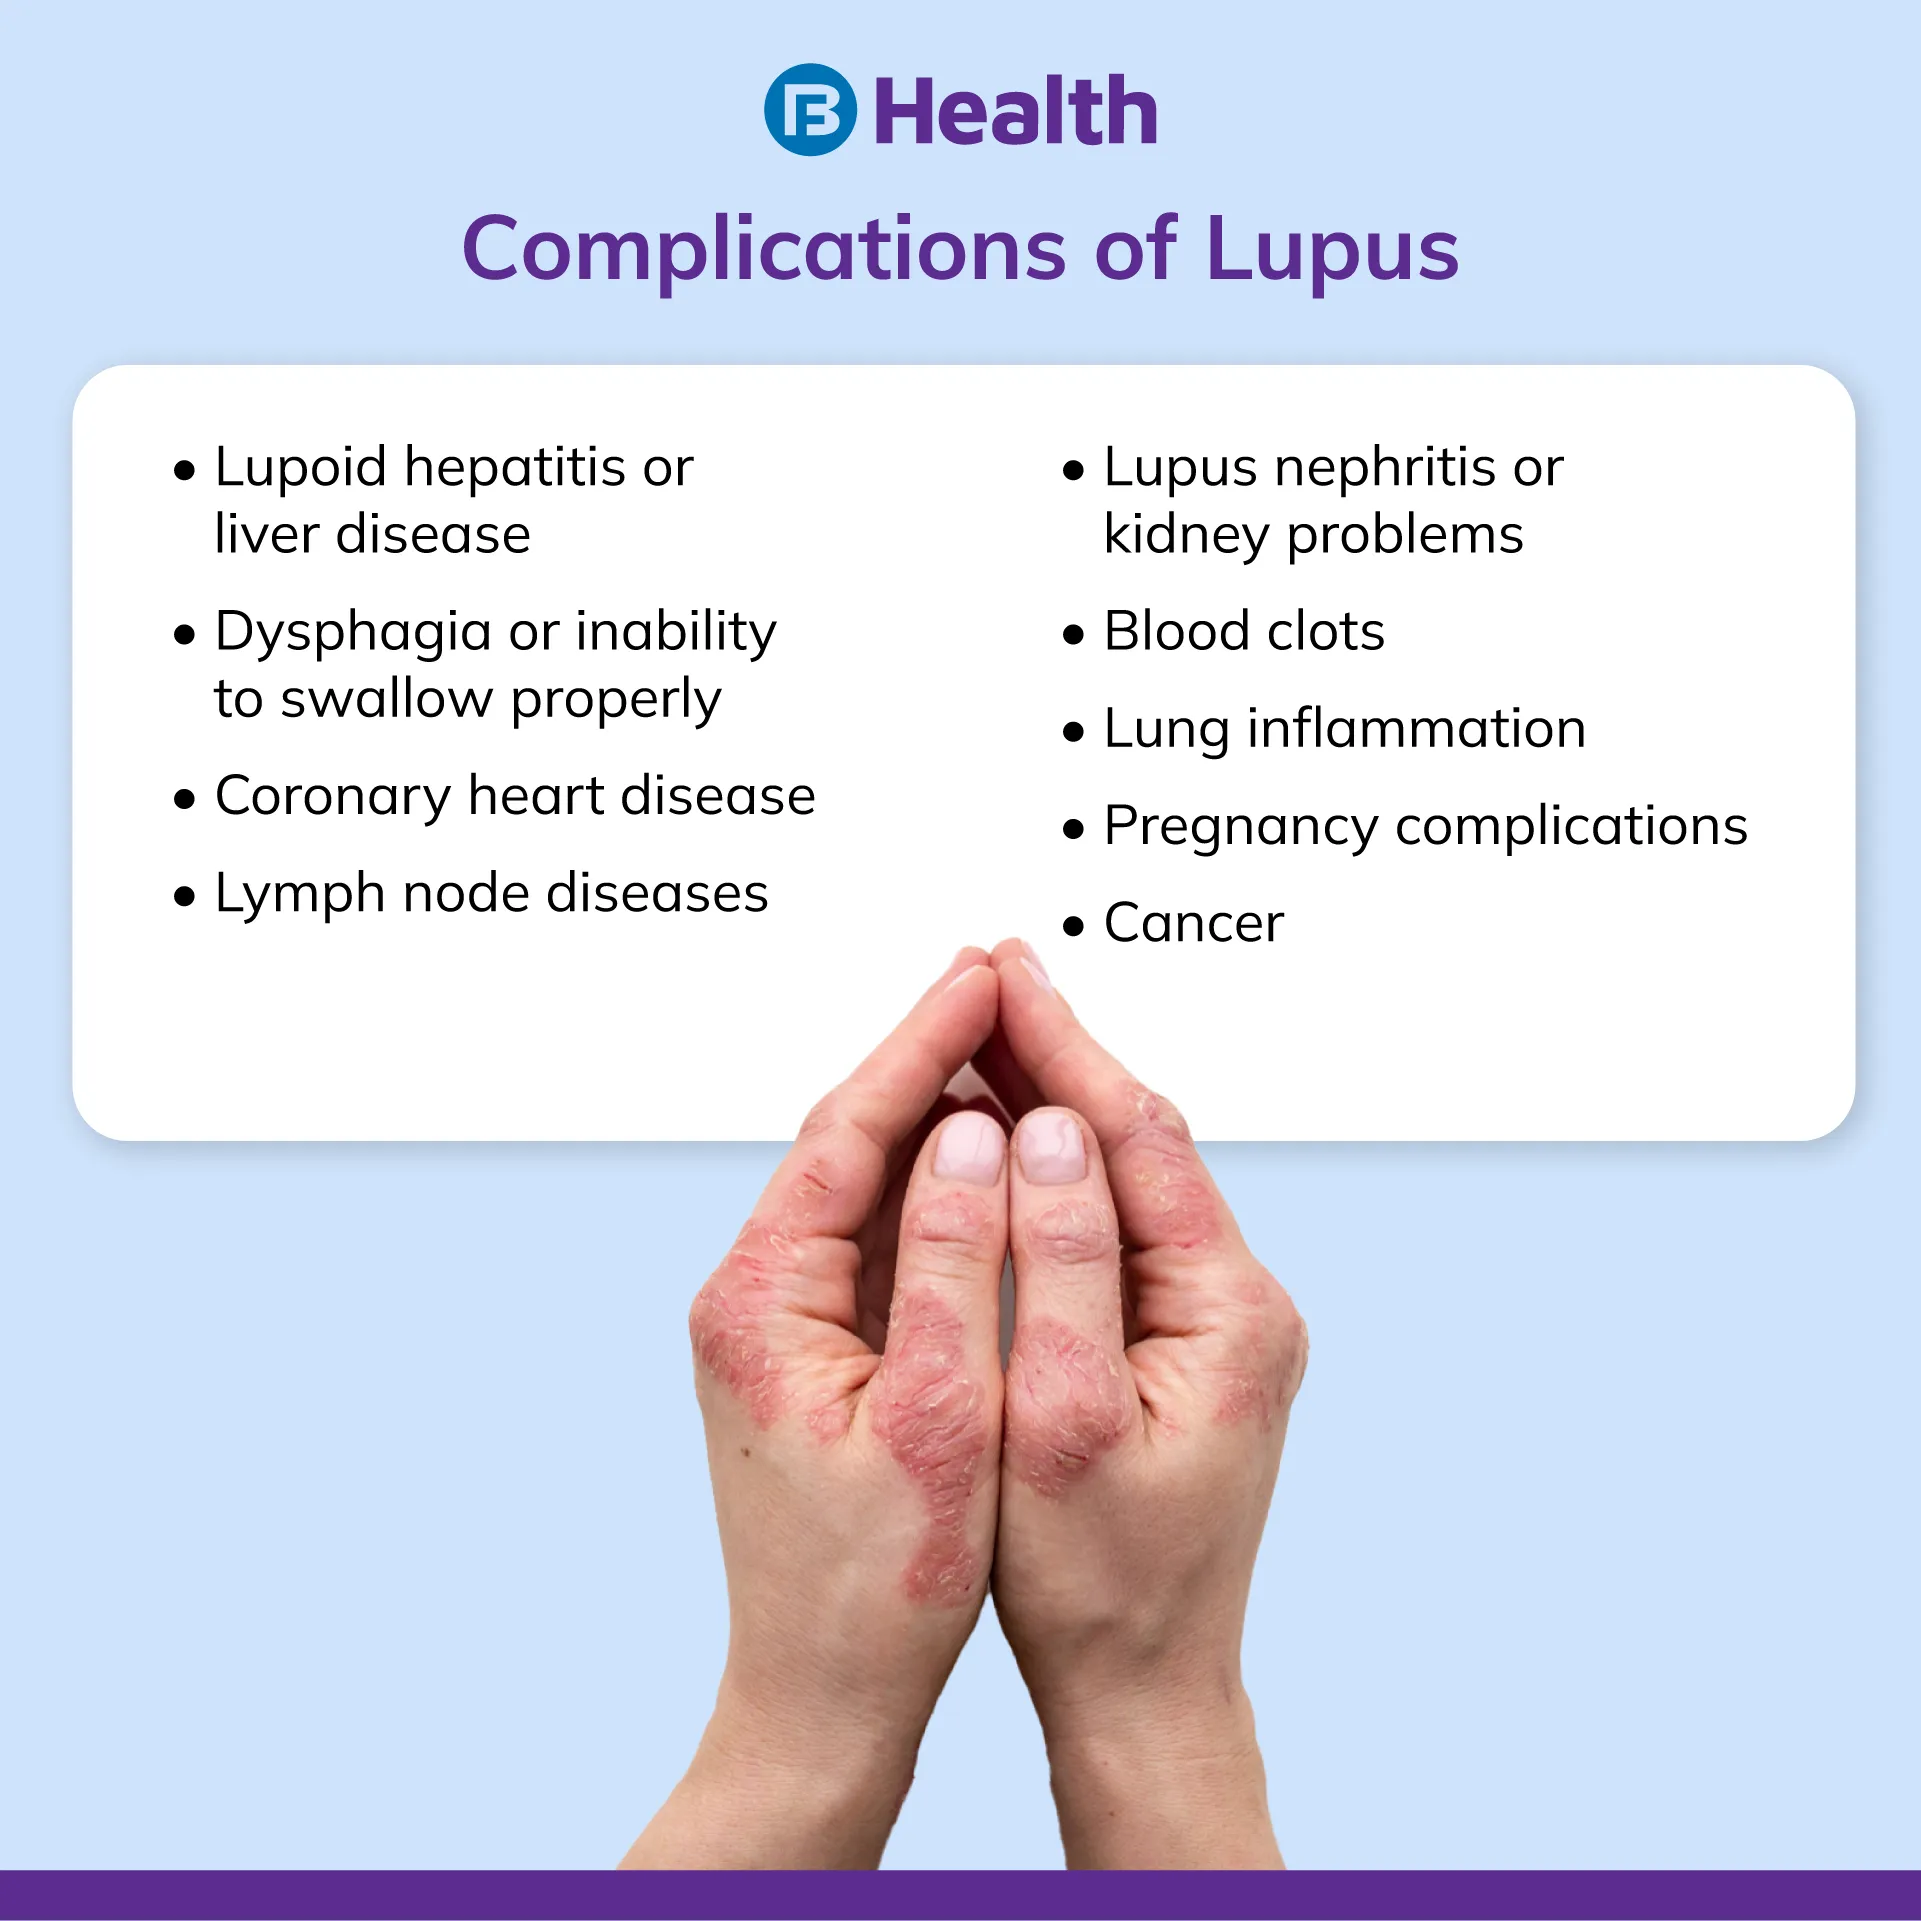 Complications of Lupus Disease